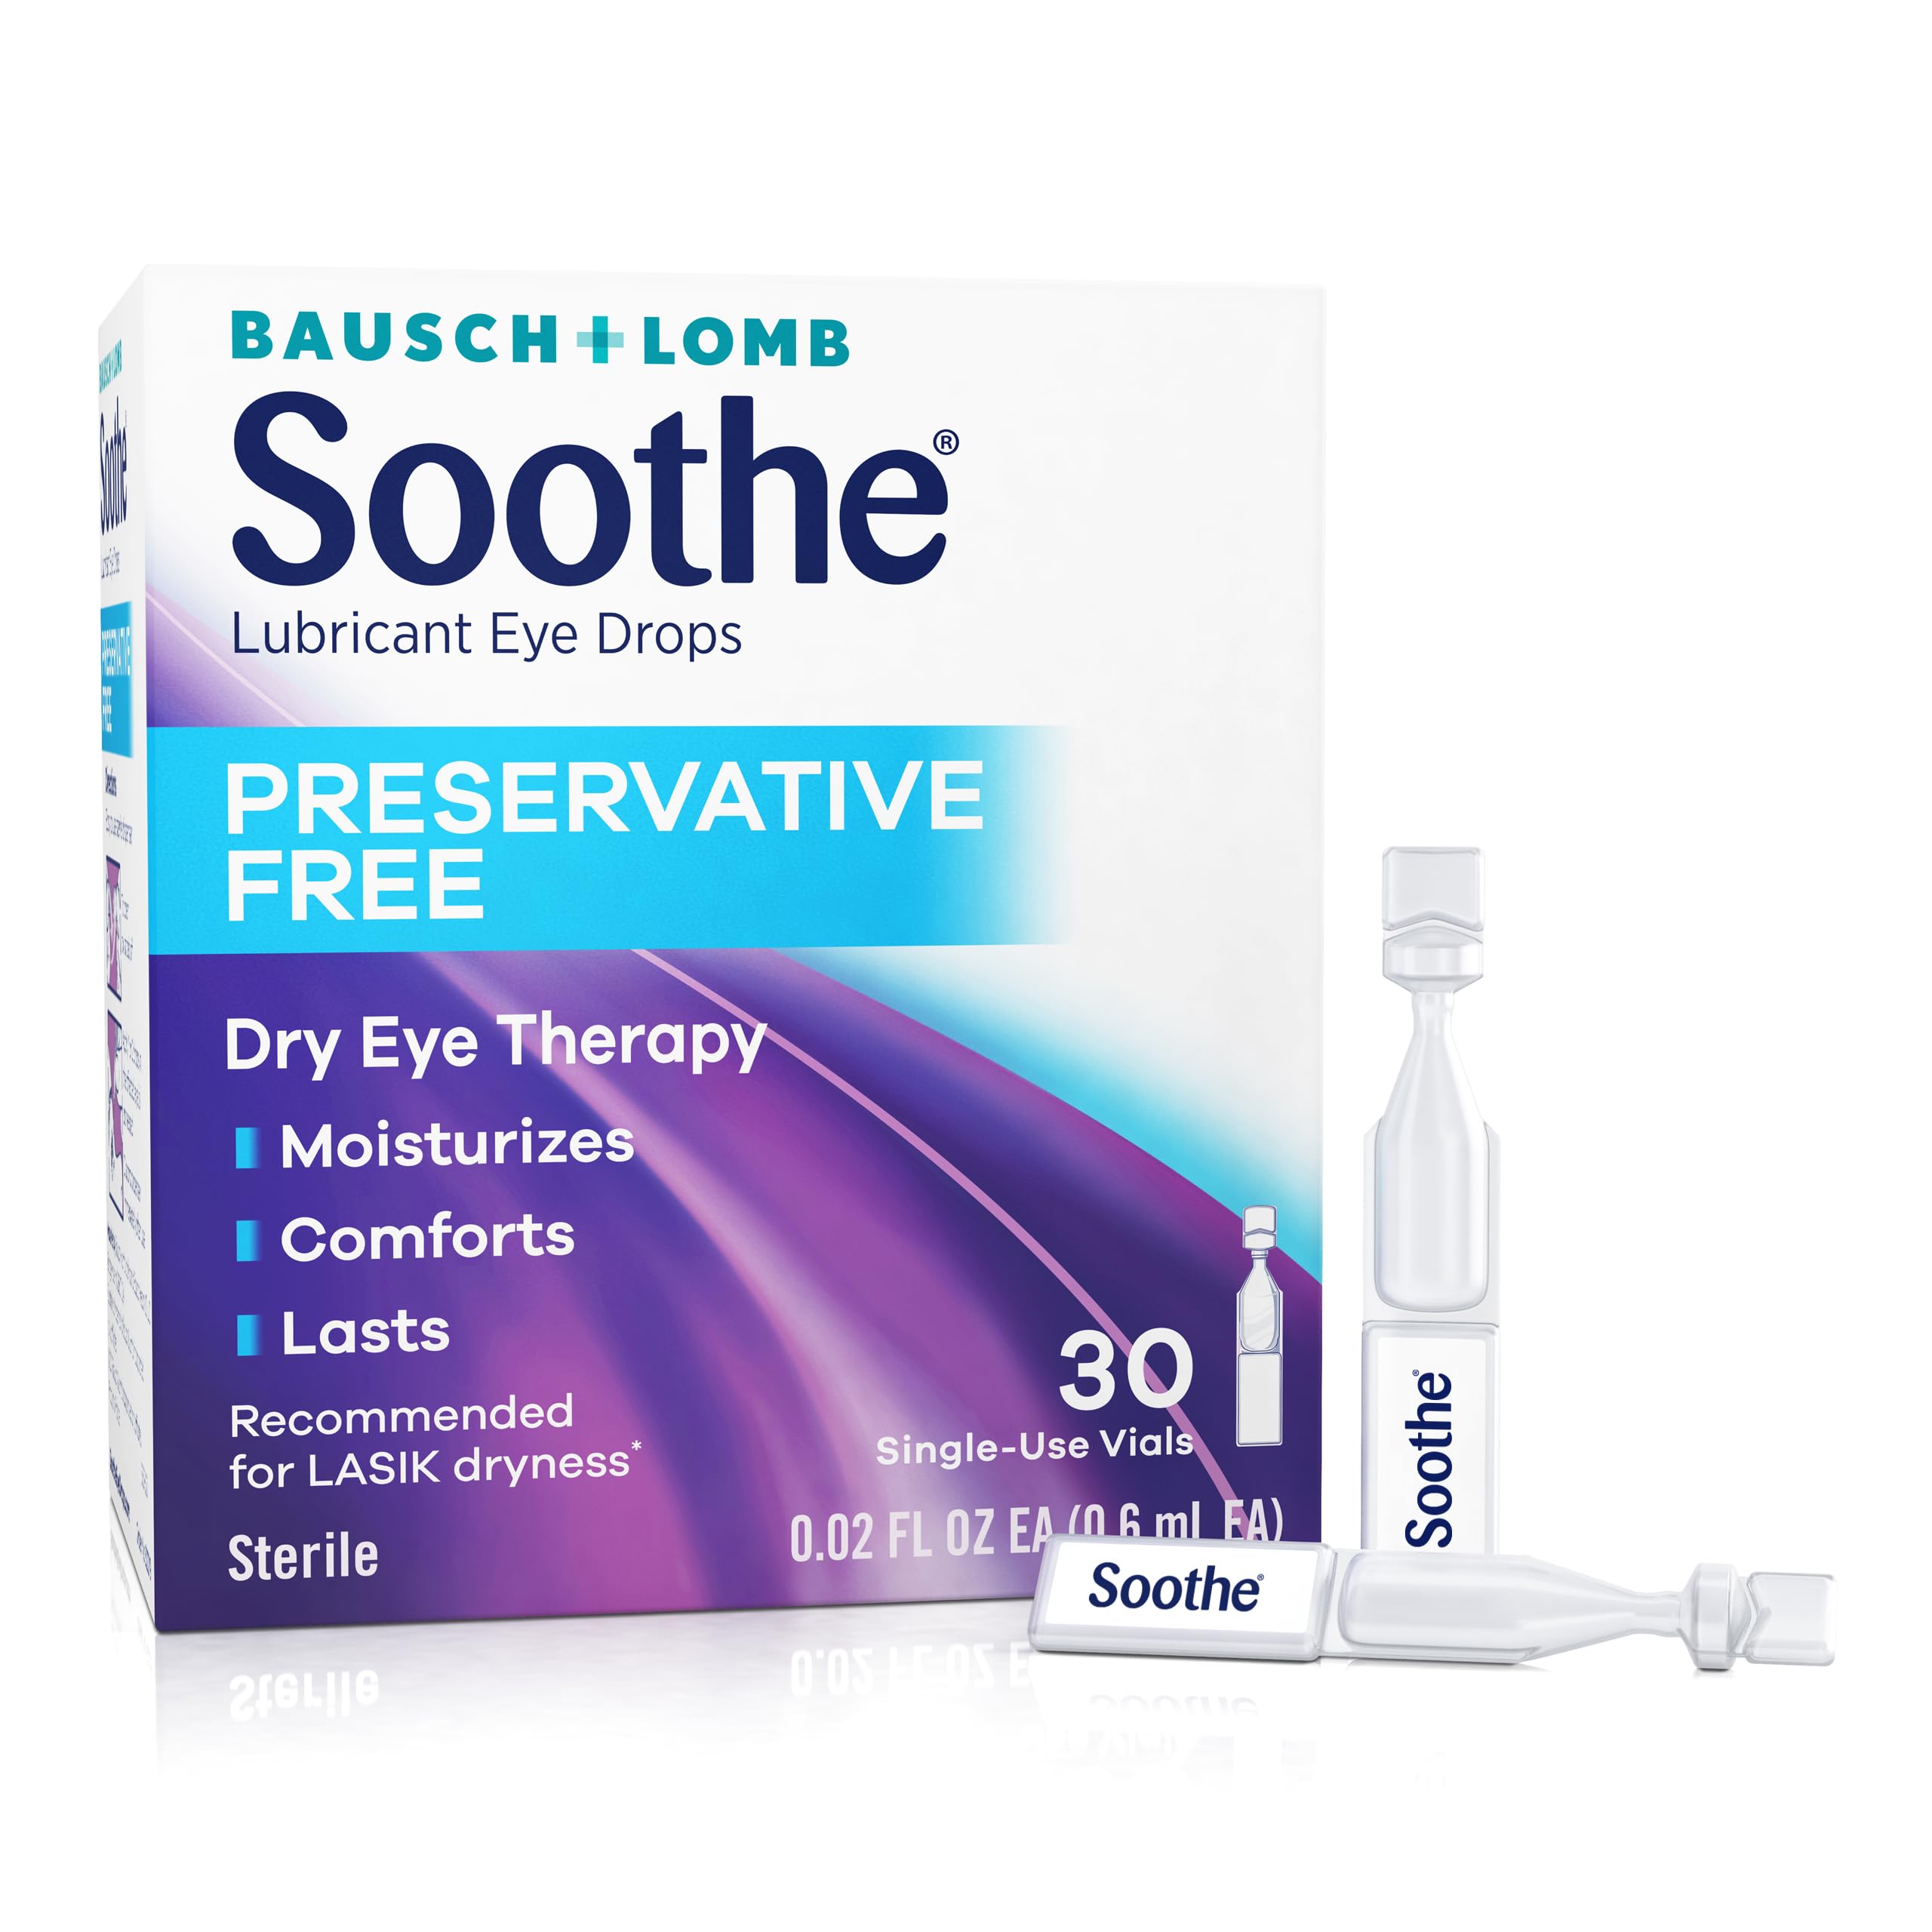 28-Count . 02-Oz Bausch + Lomb Soothe Preservative-Free Lubricant Eye Drops $6.05 (.22c Ea) w/ S&S + Free Shipping w/ Prime or on $35+